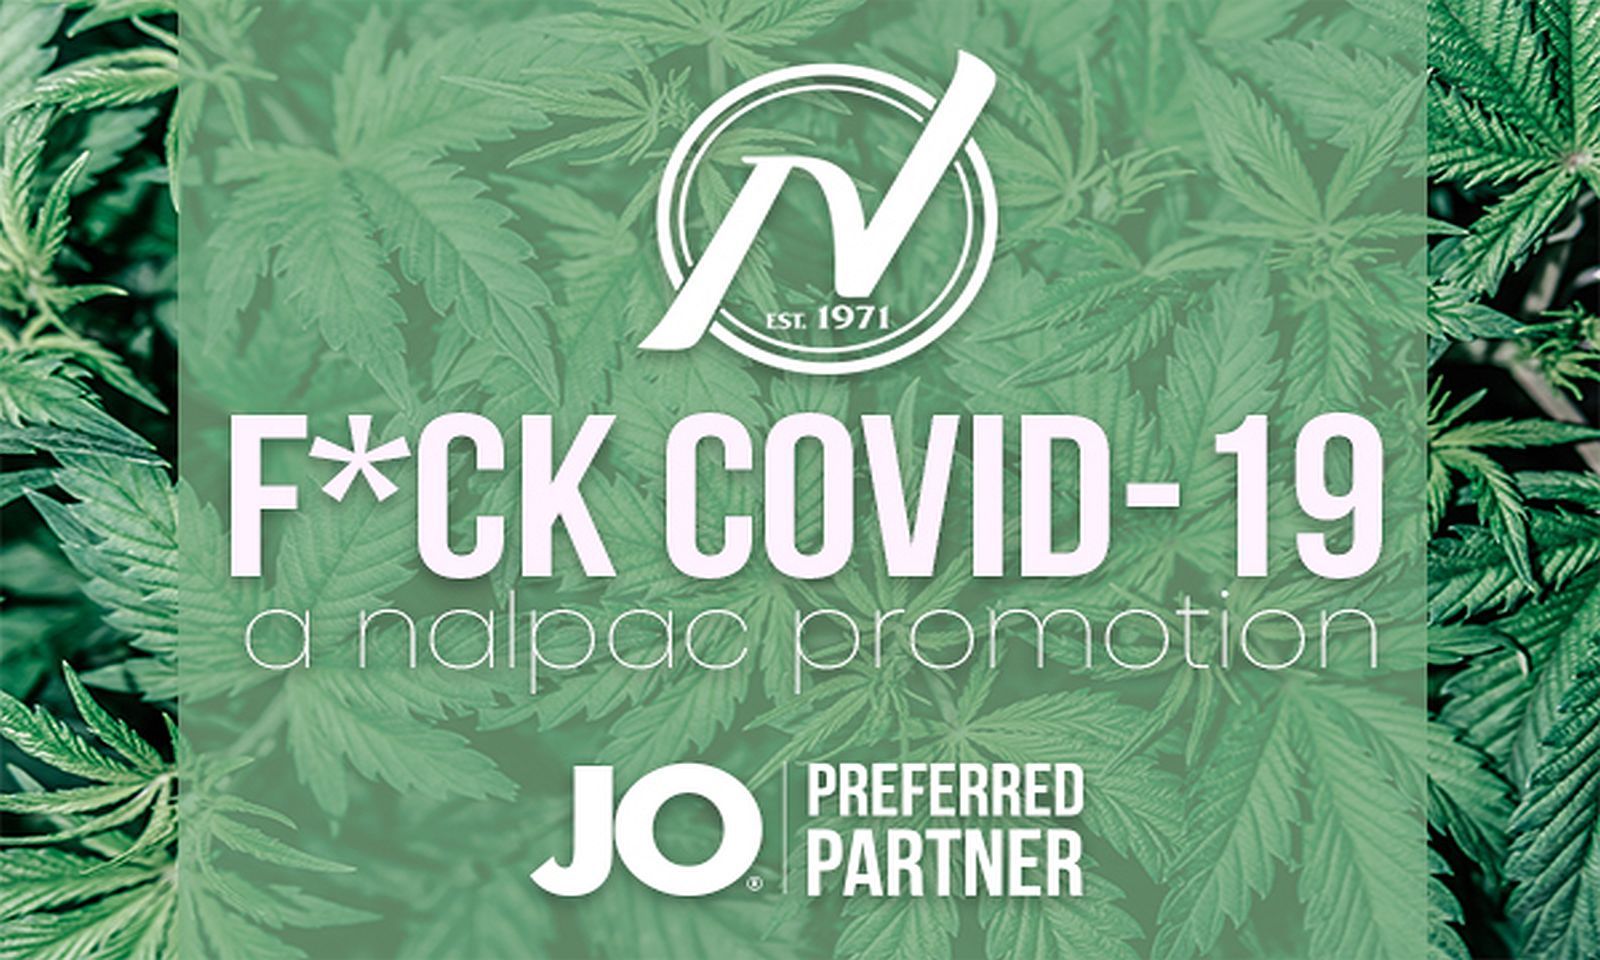 Nalpac Says F*ck COVID-19 for Third Time with System JO